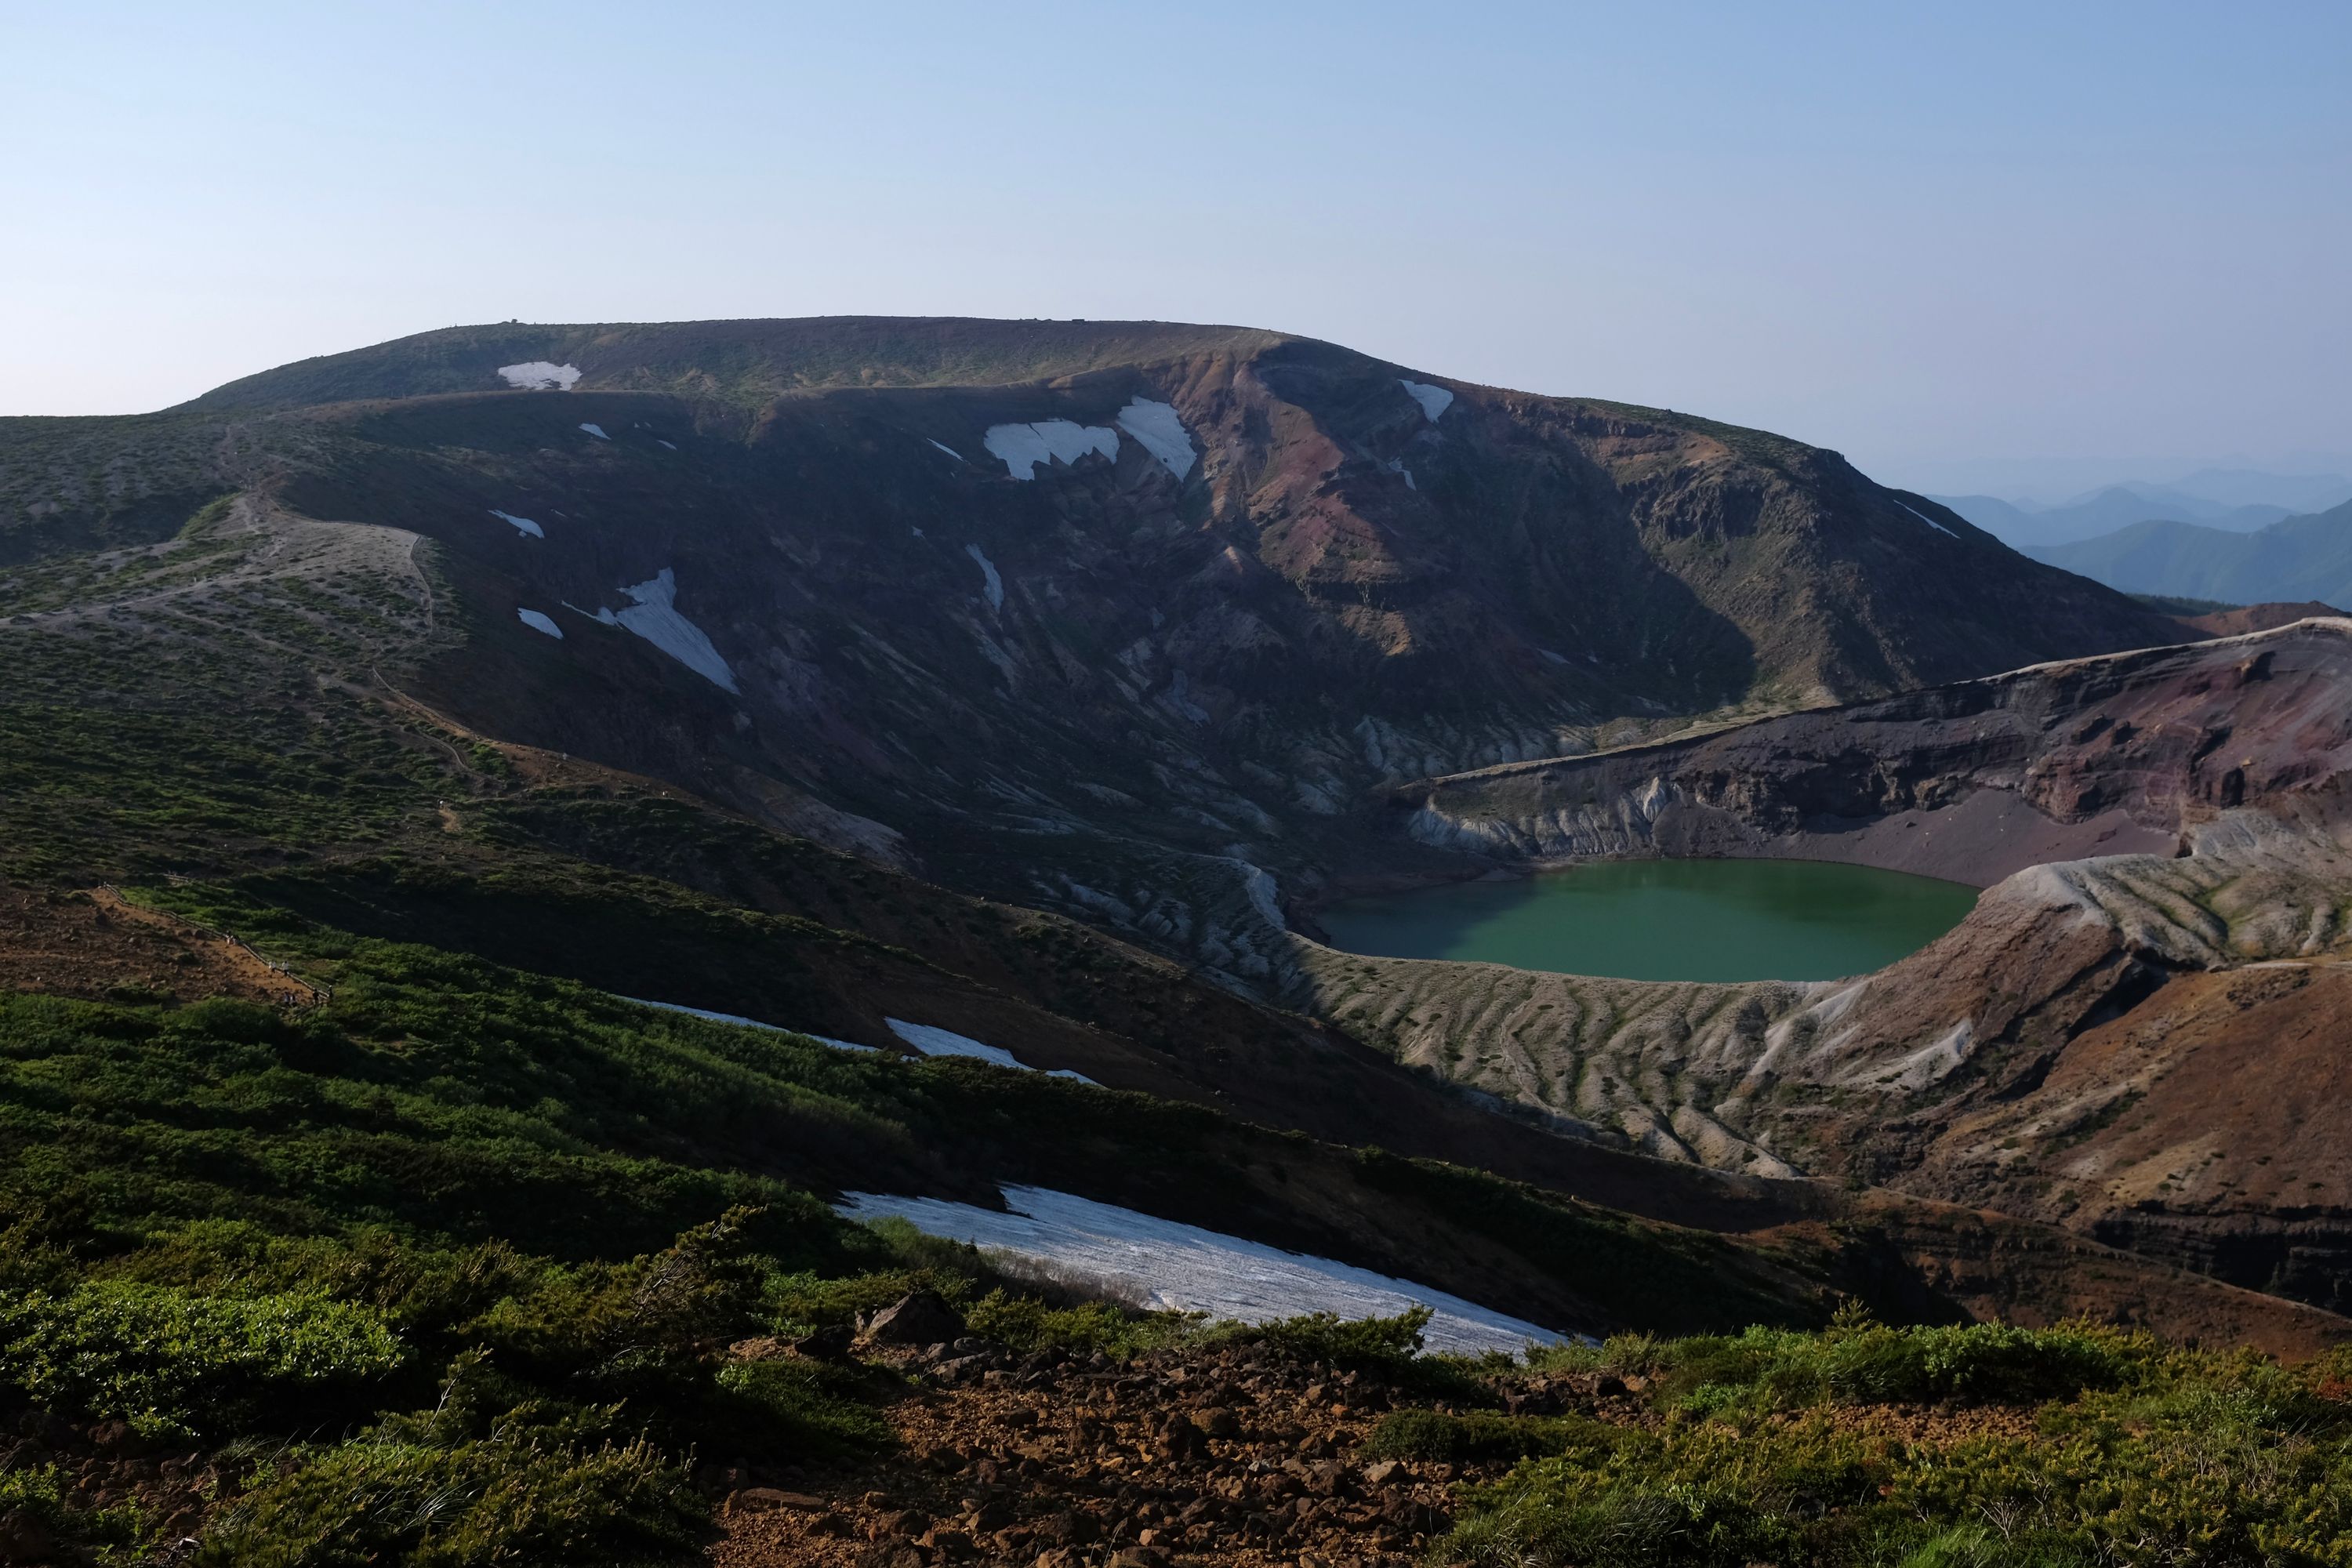 Looking towards the broad summit of Mount Zaō, above the crater lake.